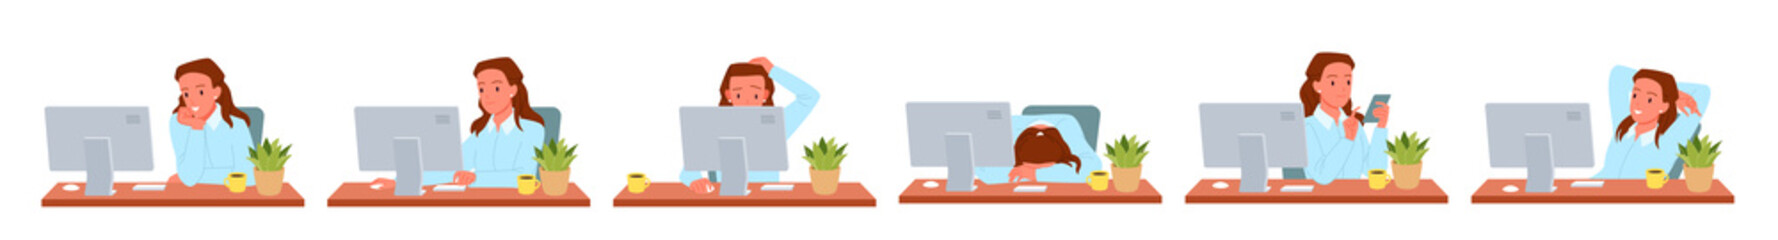 Work of woman in different poses in front of office computer vector illustration. Cartoon businesswoman sitting at desk, professional manager showing gestures, employee working isolated on white